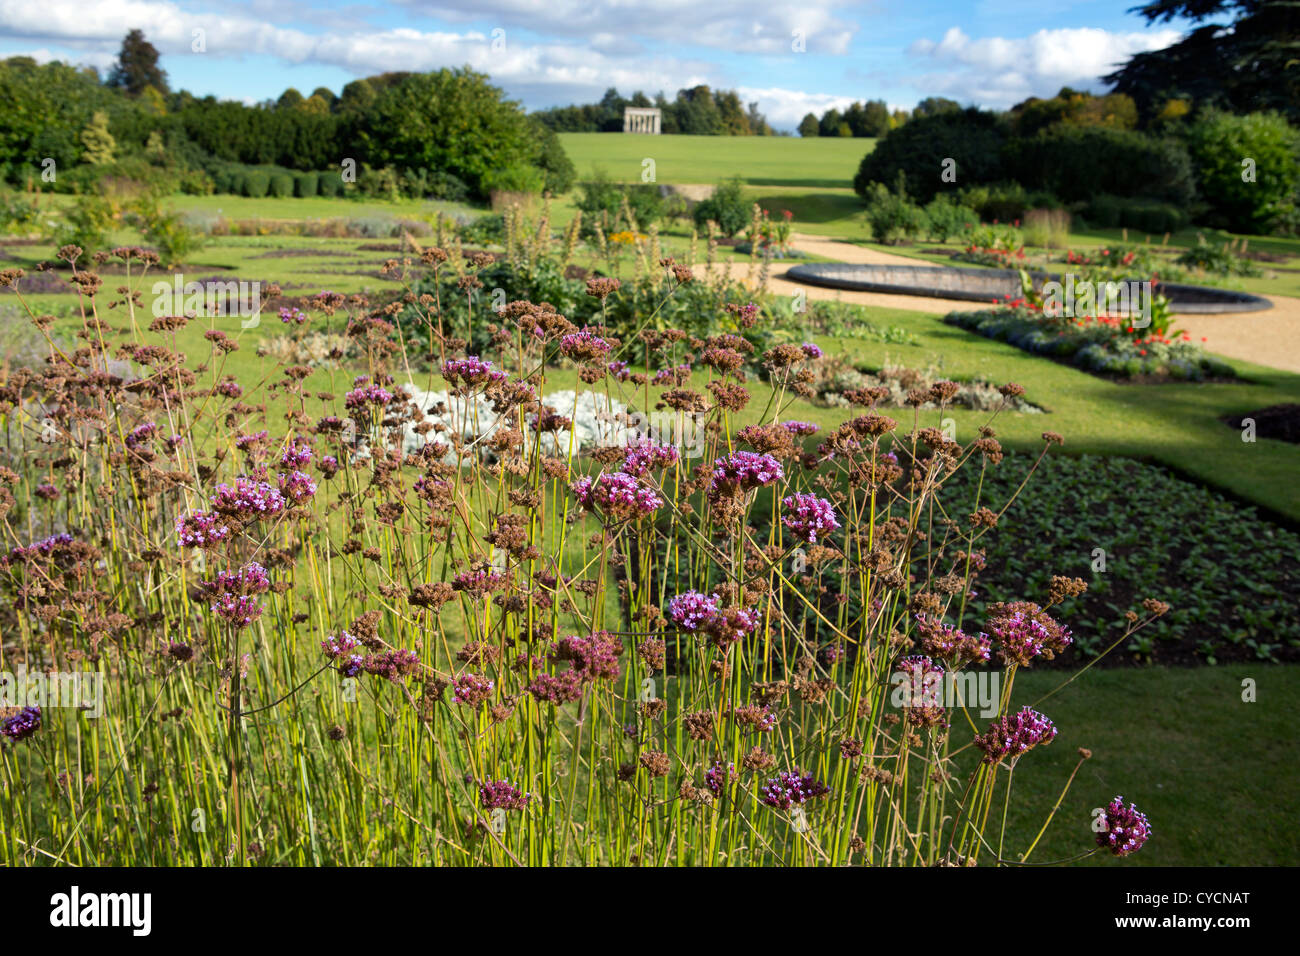 Audley End House and Gardens in Essex, England. Stock Photo